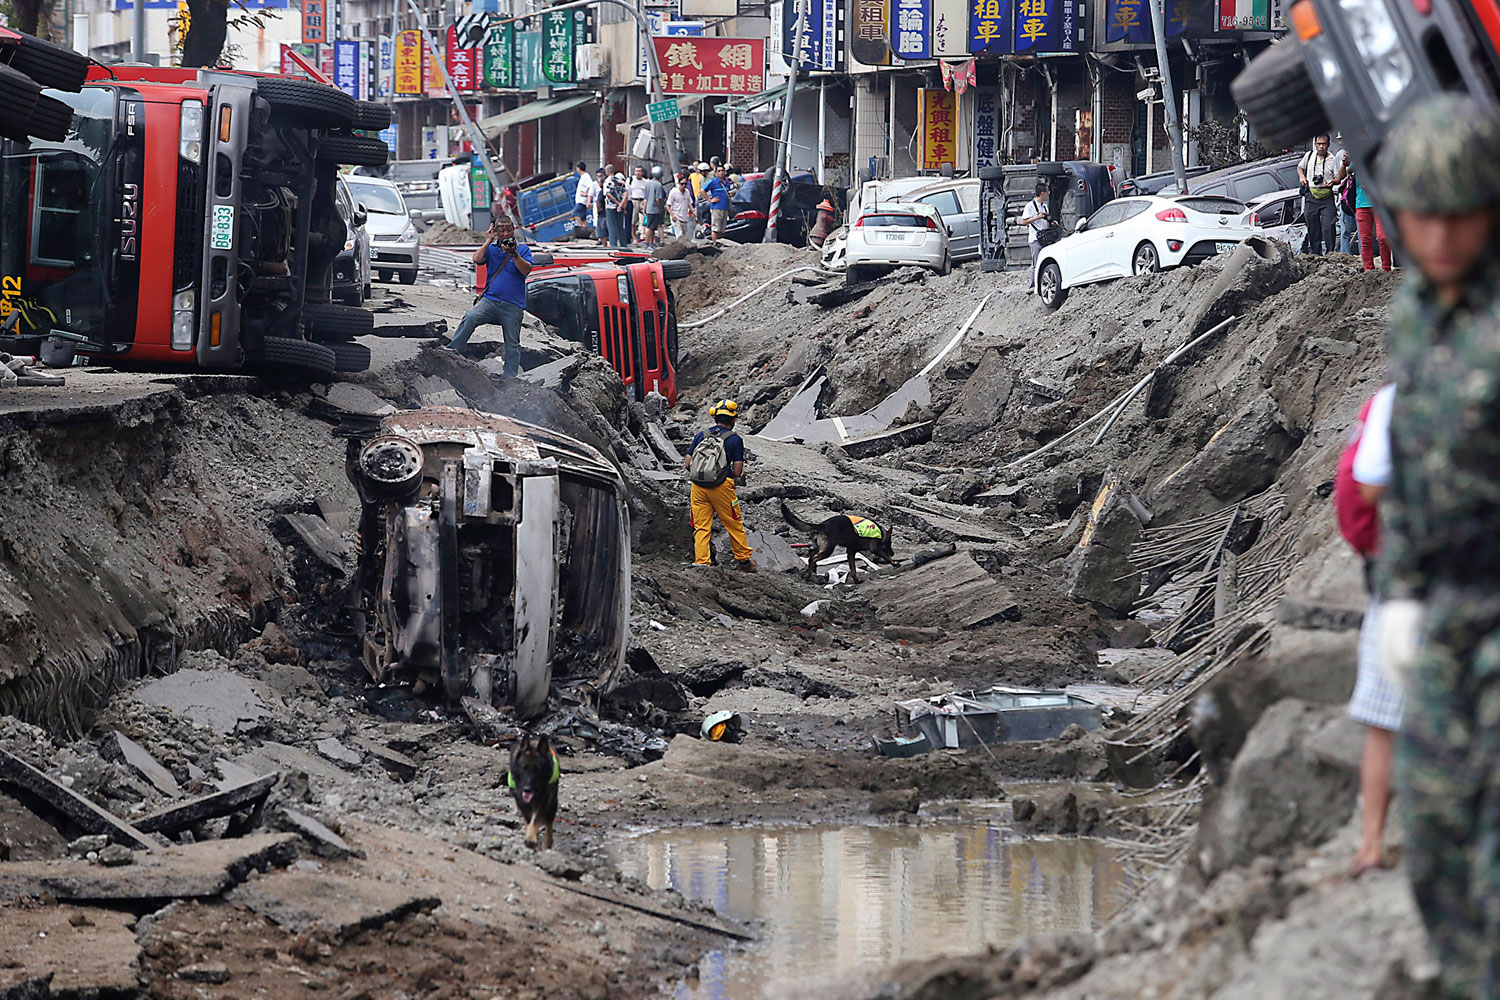 Rescue personnel survey the wreckage after an explosion in Kaohsiung, southern Taiwan on Aug. 1, 2014.